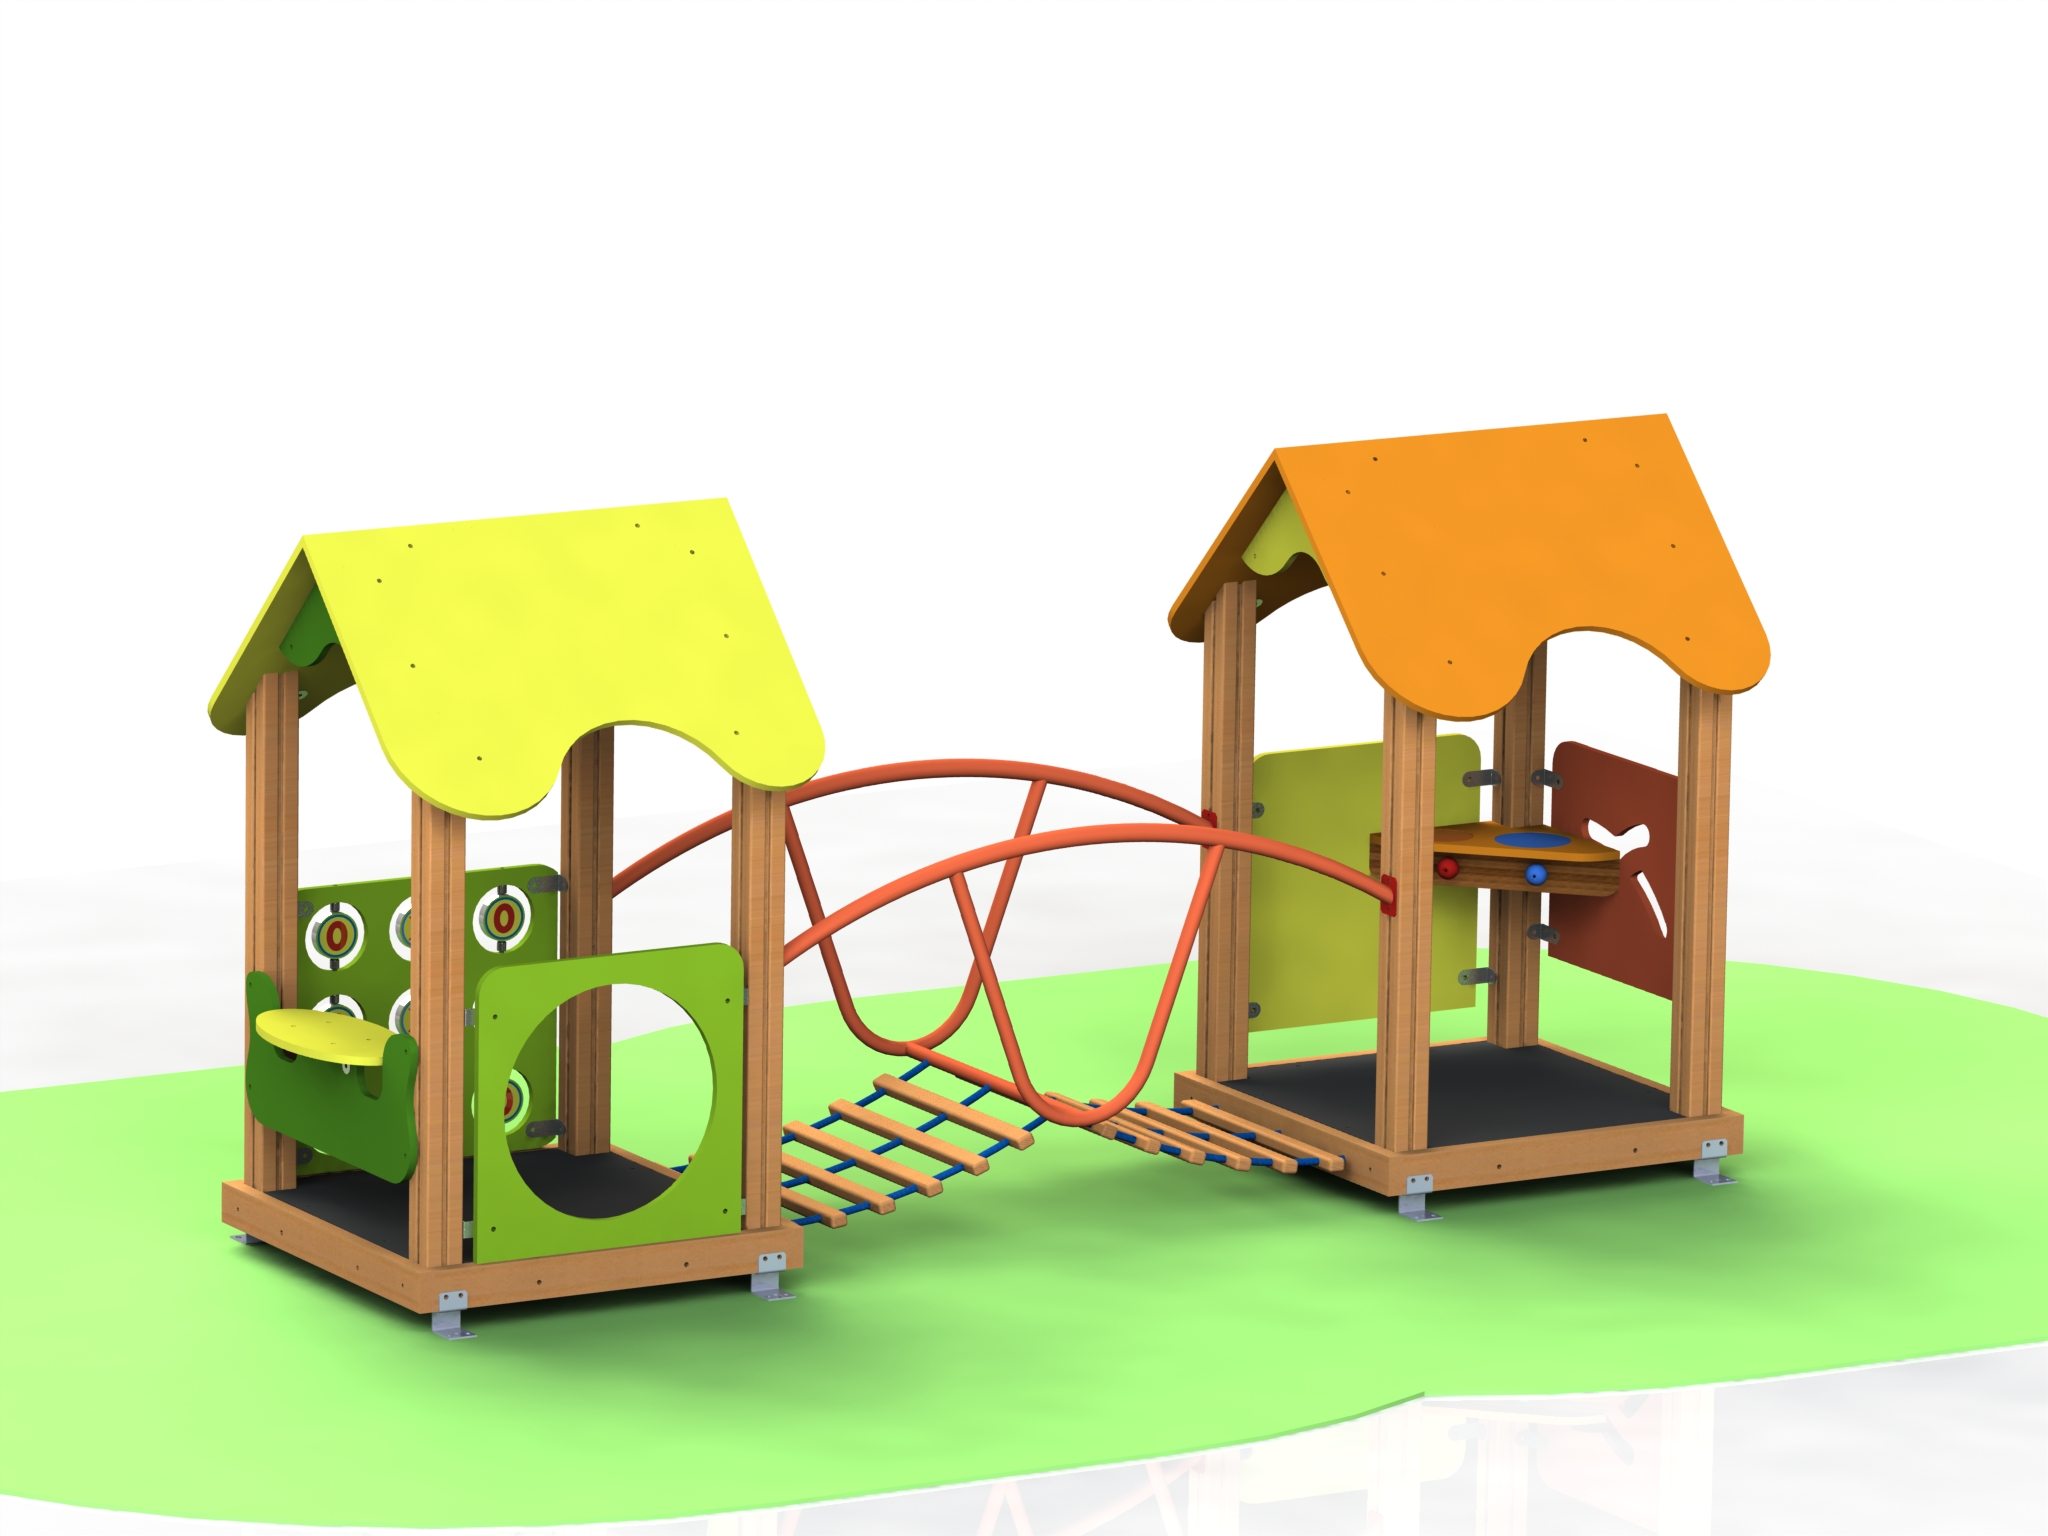 Product photo: Children play house with entertaining games and swing bridge, model КД64 – “The two houses”